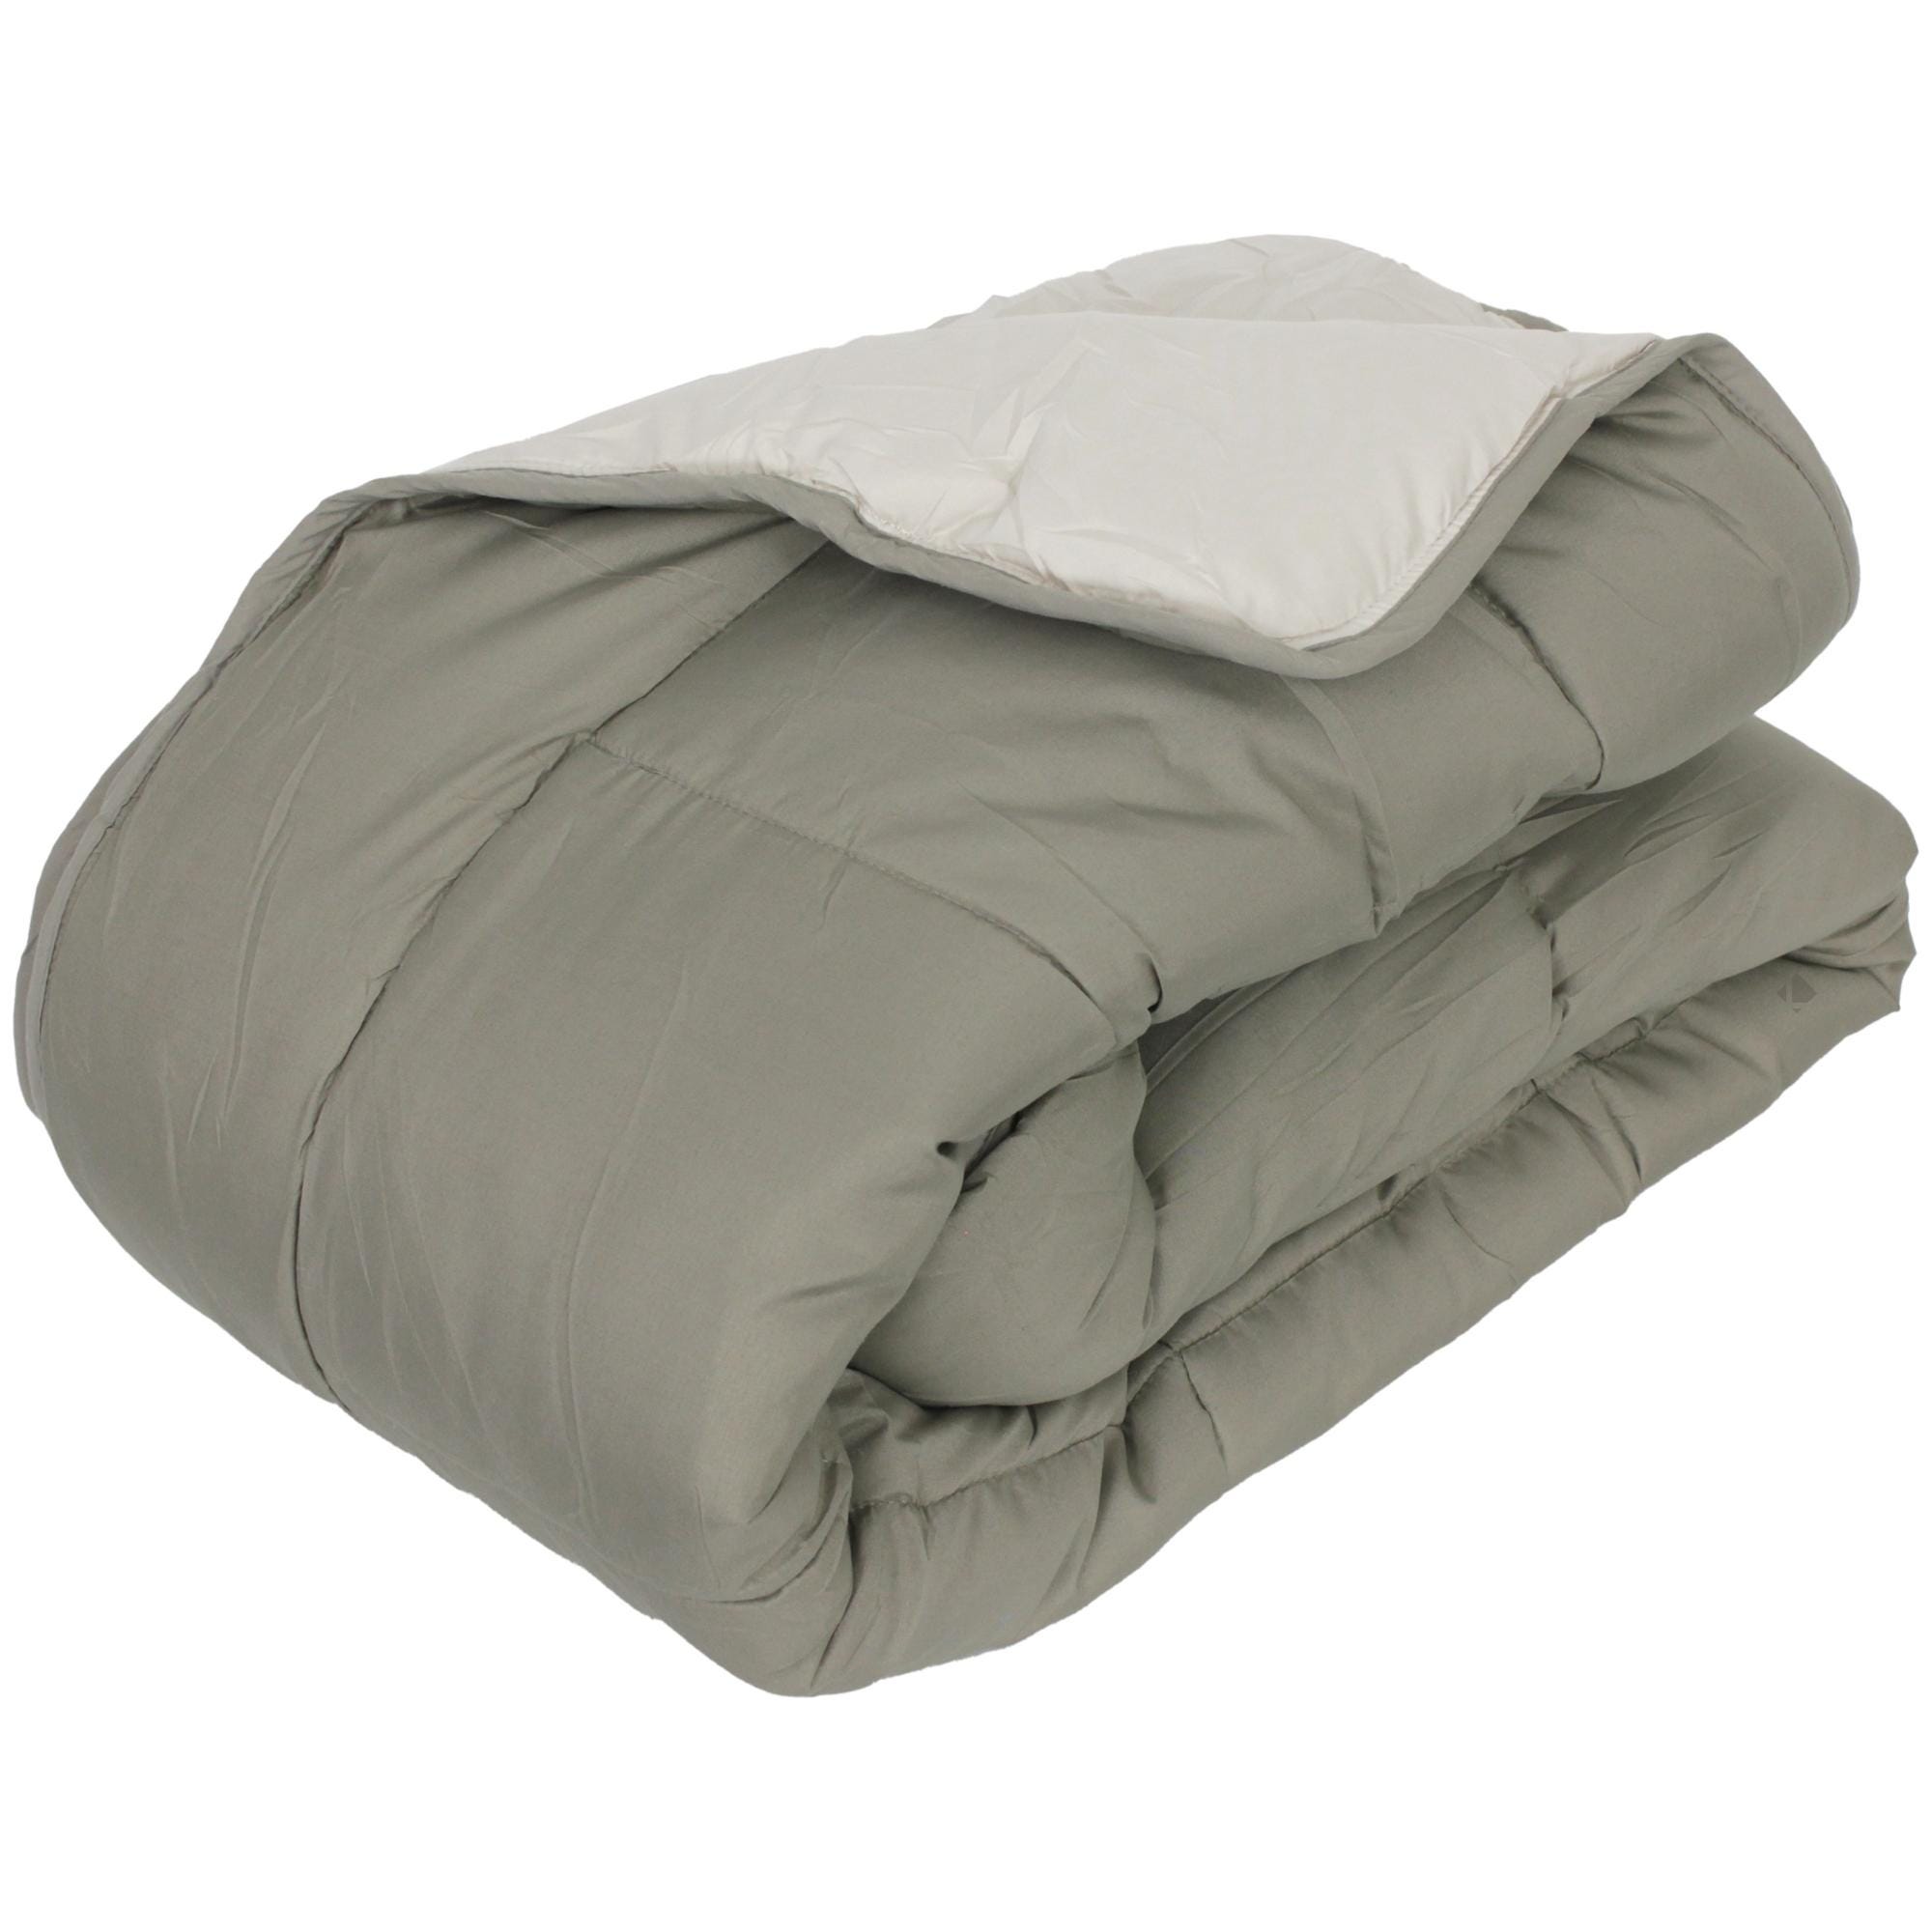 Couette hiver 240x220 cm COCOON BICOLORE Taupe/Lin garnissage